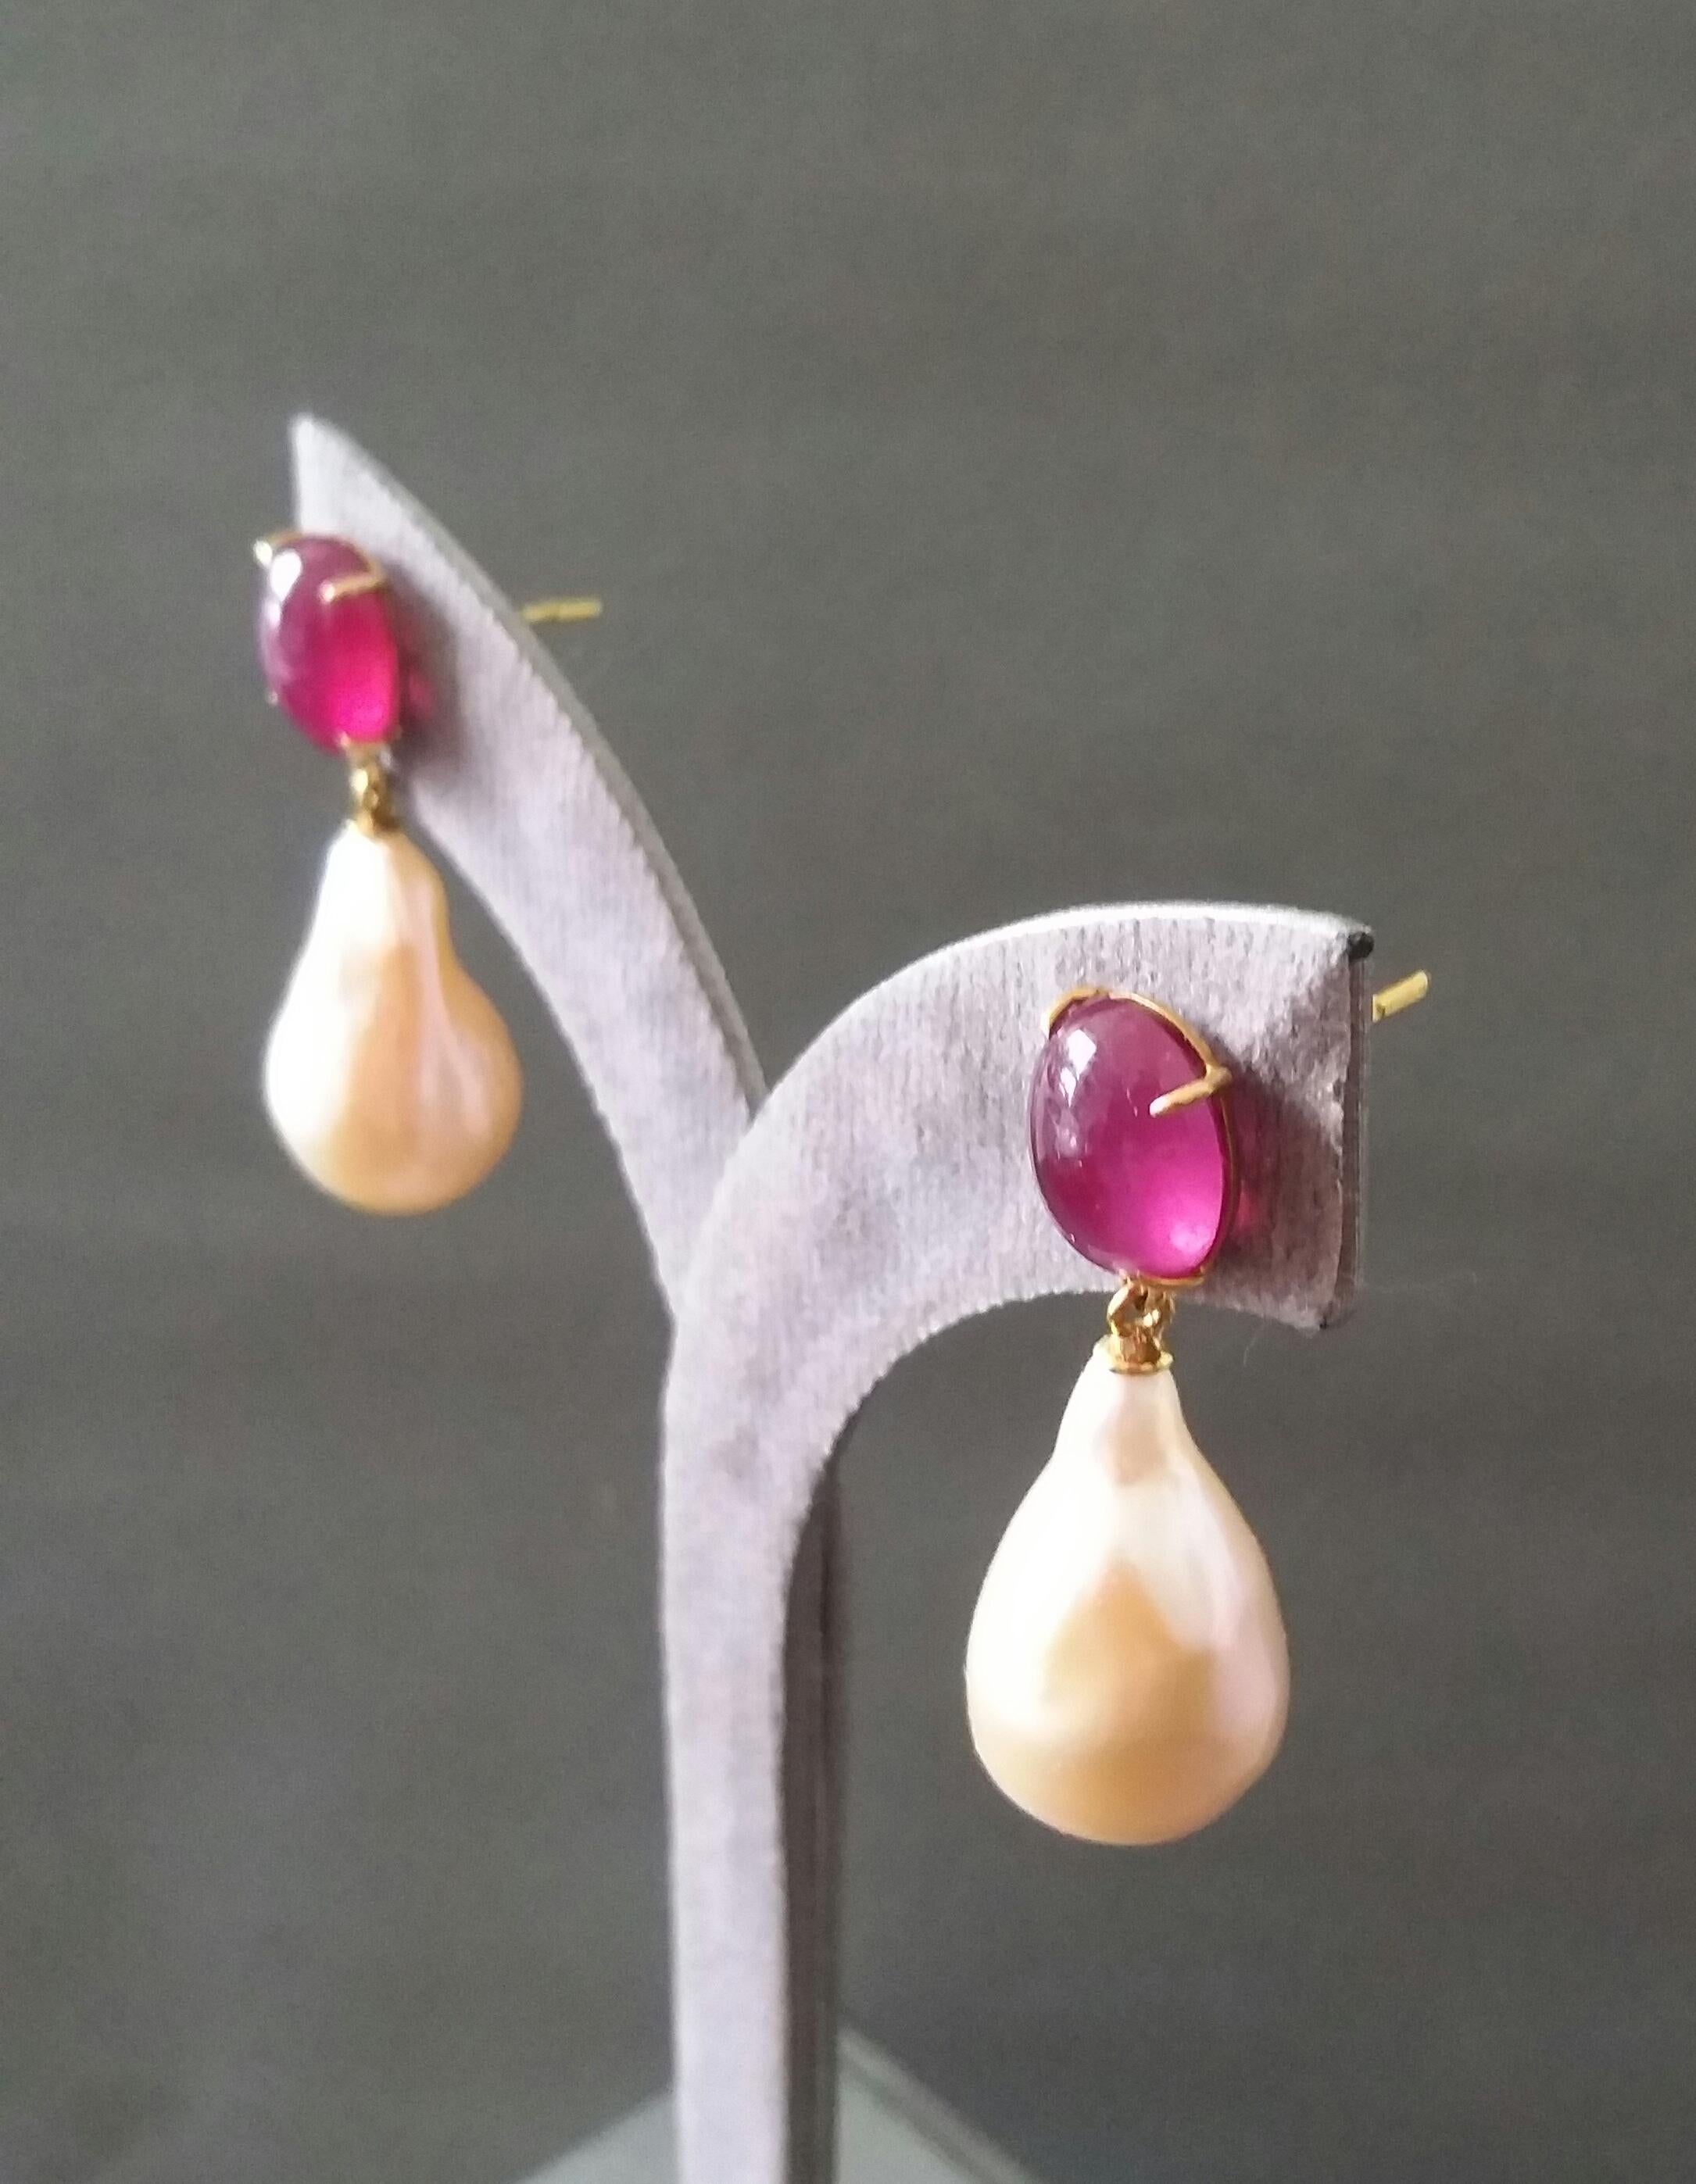 Big Size Pear Shape Cream Color Pearls Oval Ruby Cabochon 14 Karat Gold Earrings For Sale 2